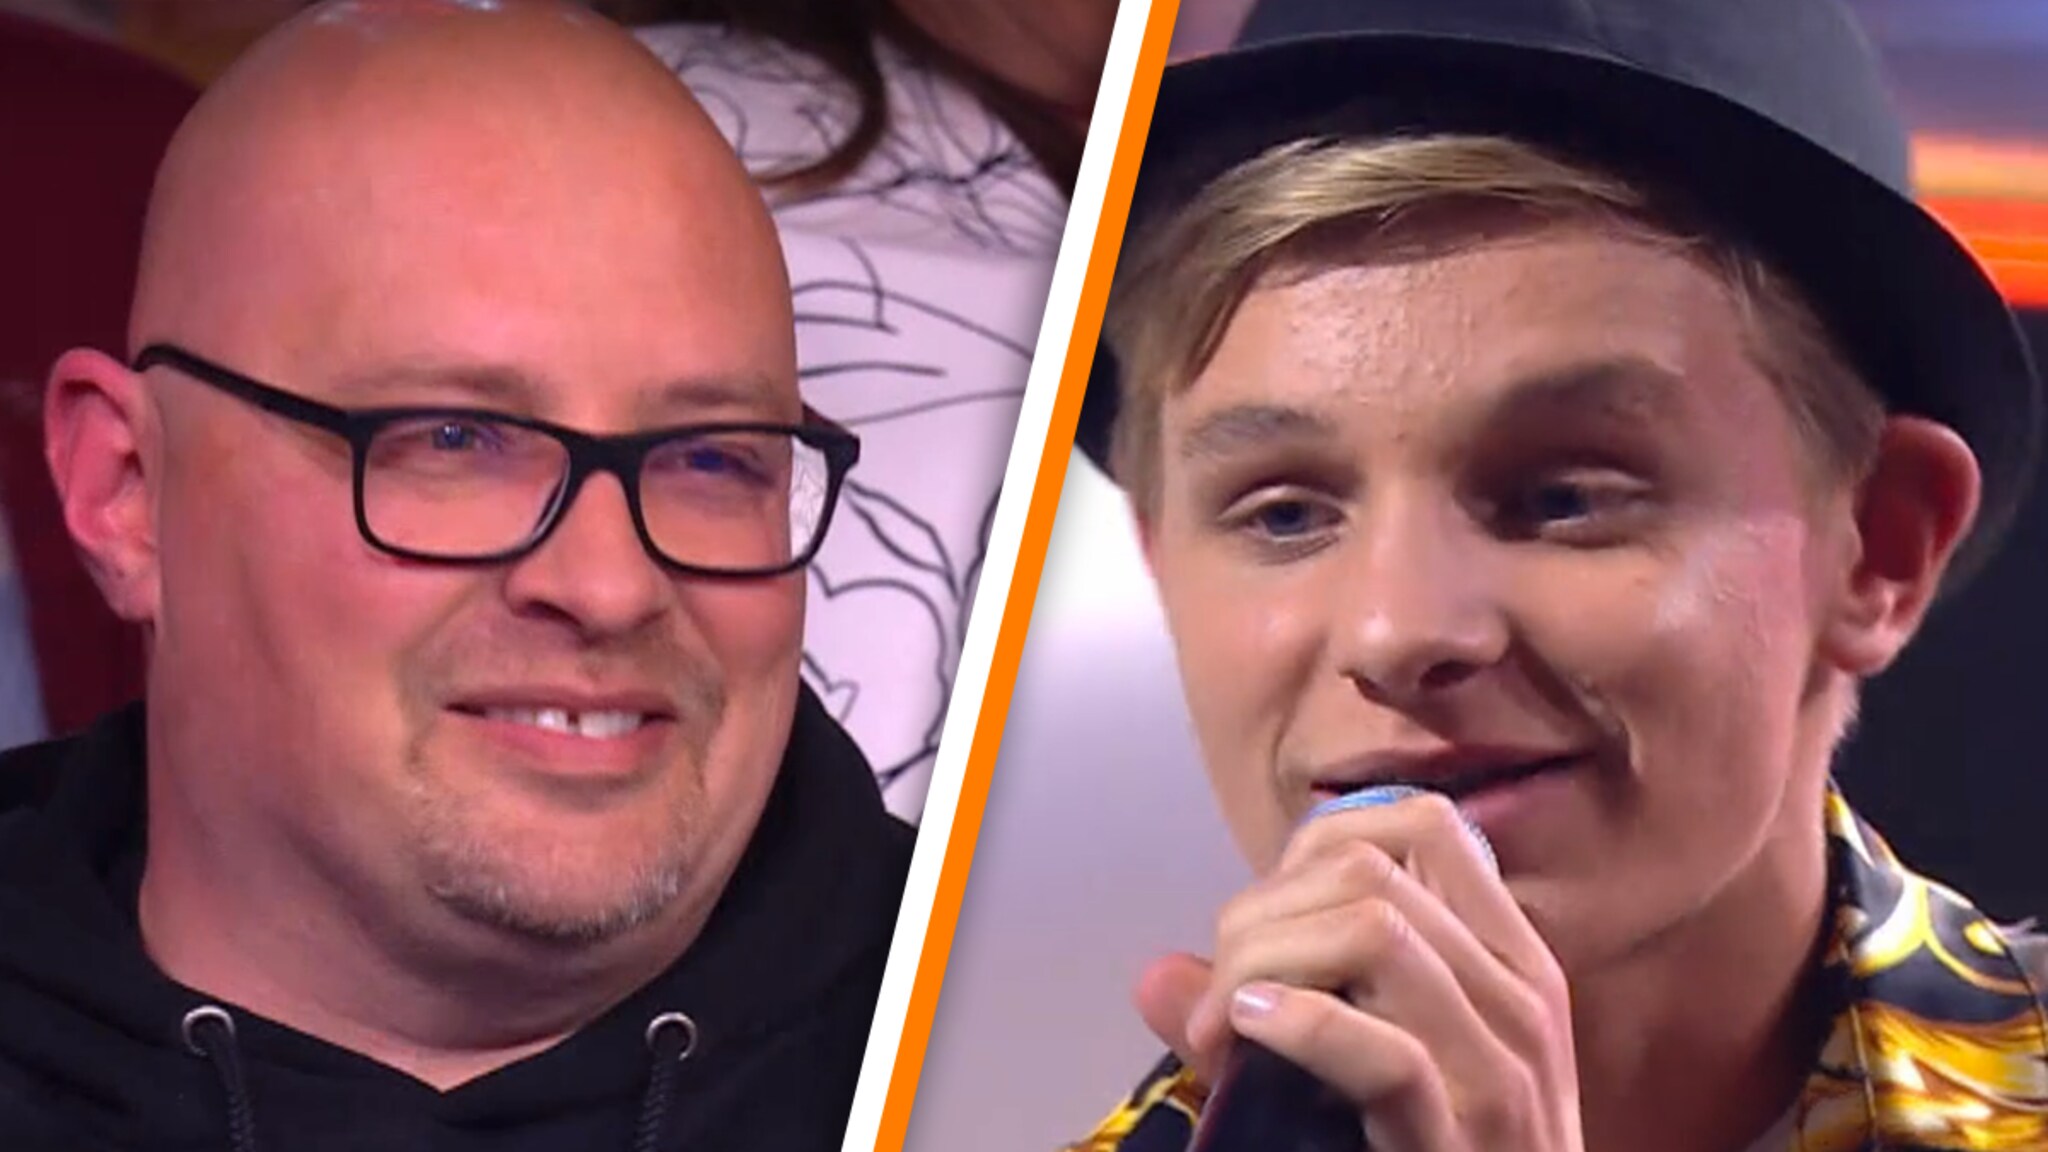 Holland’s Got Talent candidate surprises his father in the audience